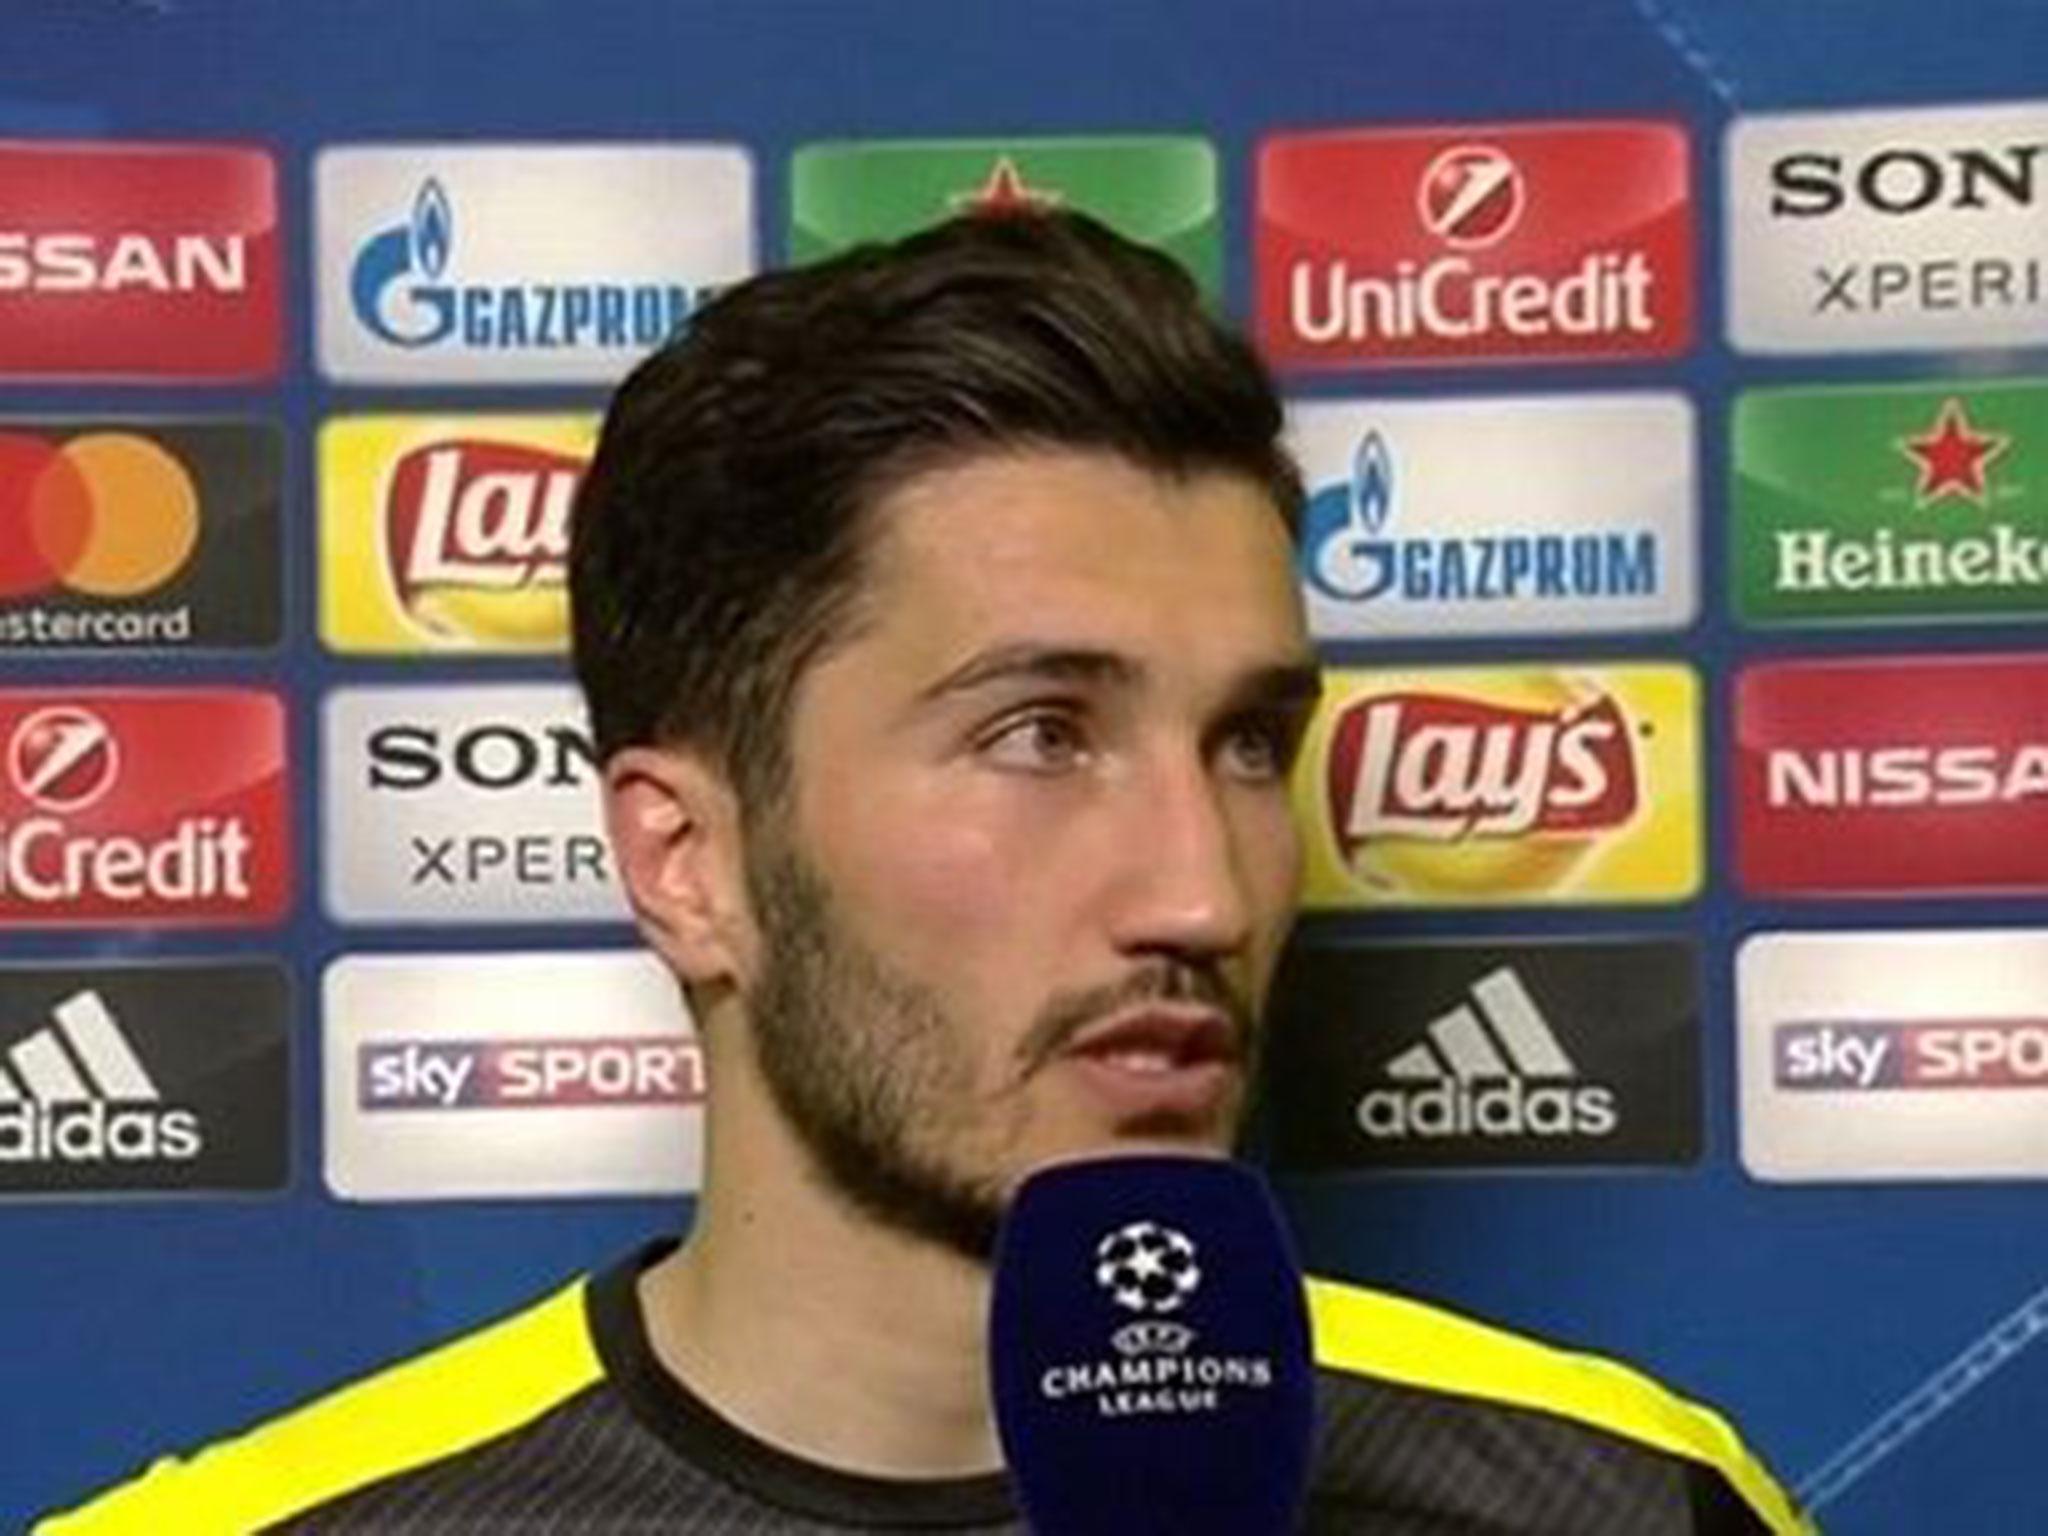 Nuri Sahin was visibly emotional at what had happened over the previous 24 hours